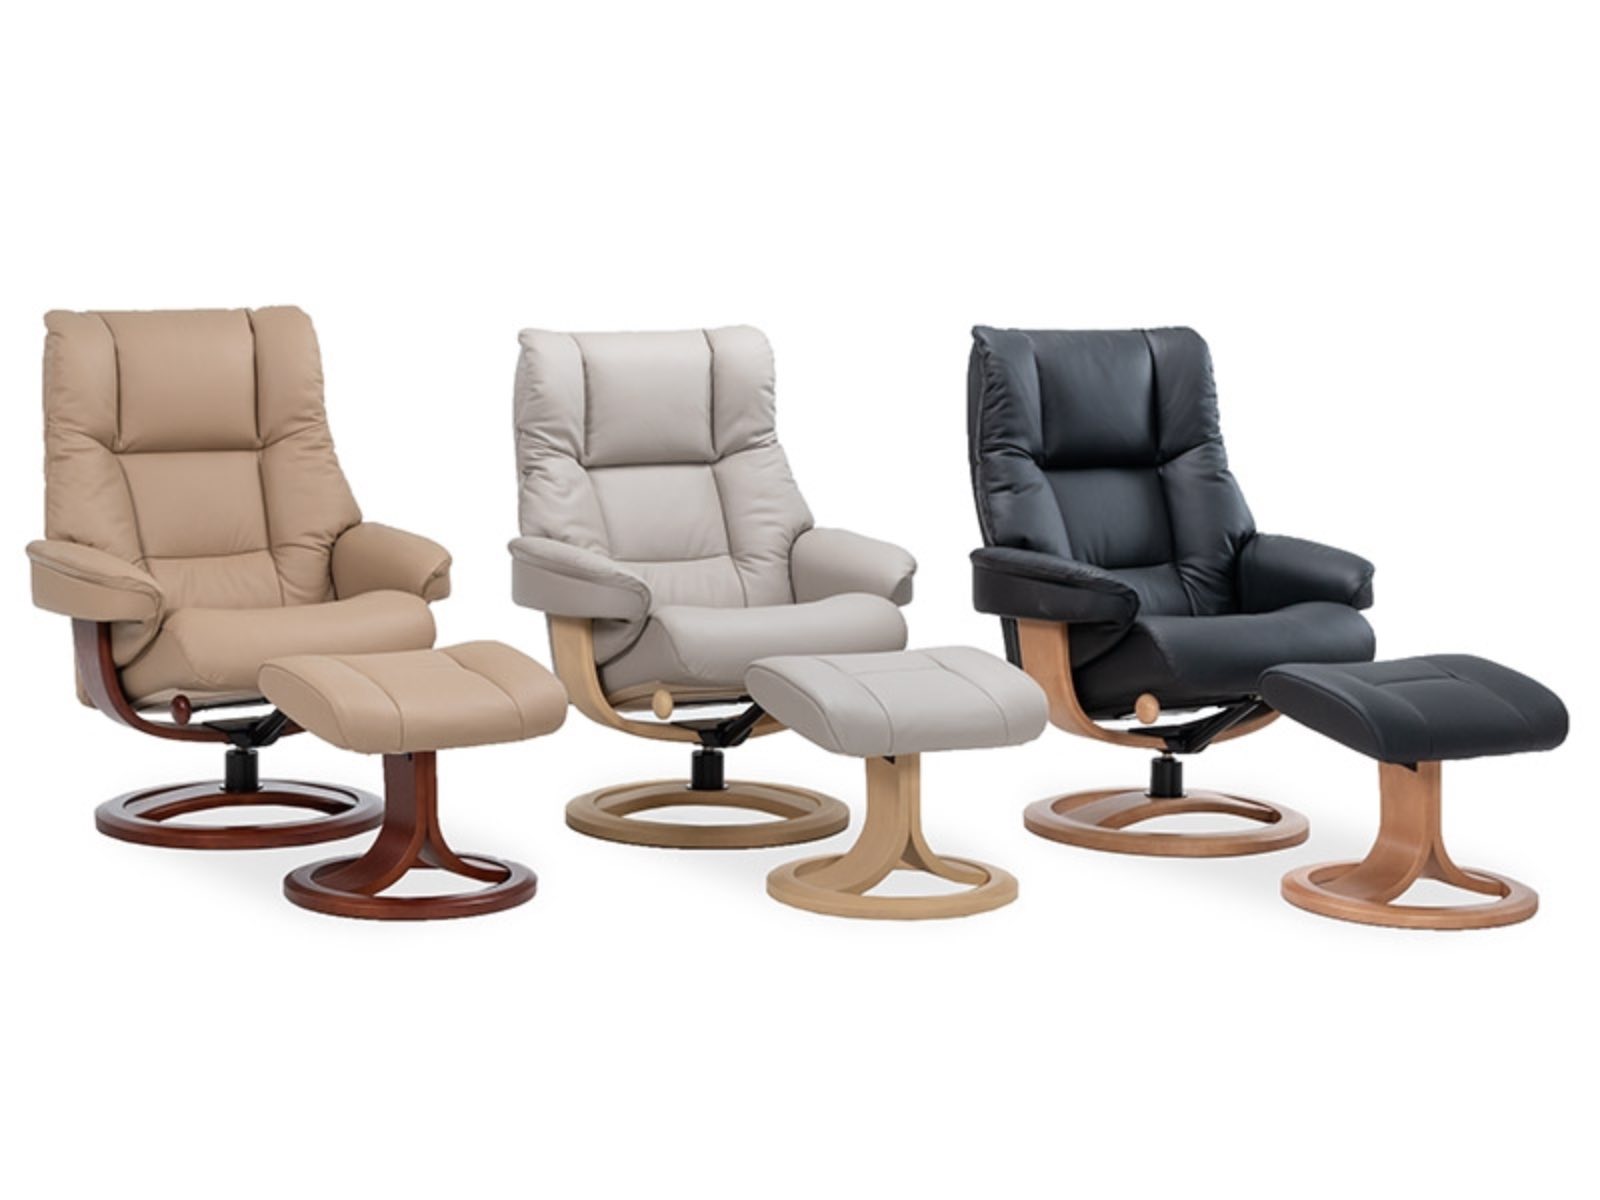 Leather Recliner Chairs Nordic 60, Nordic Leather Recliner Chair